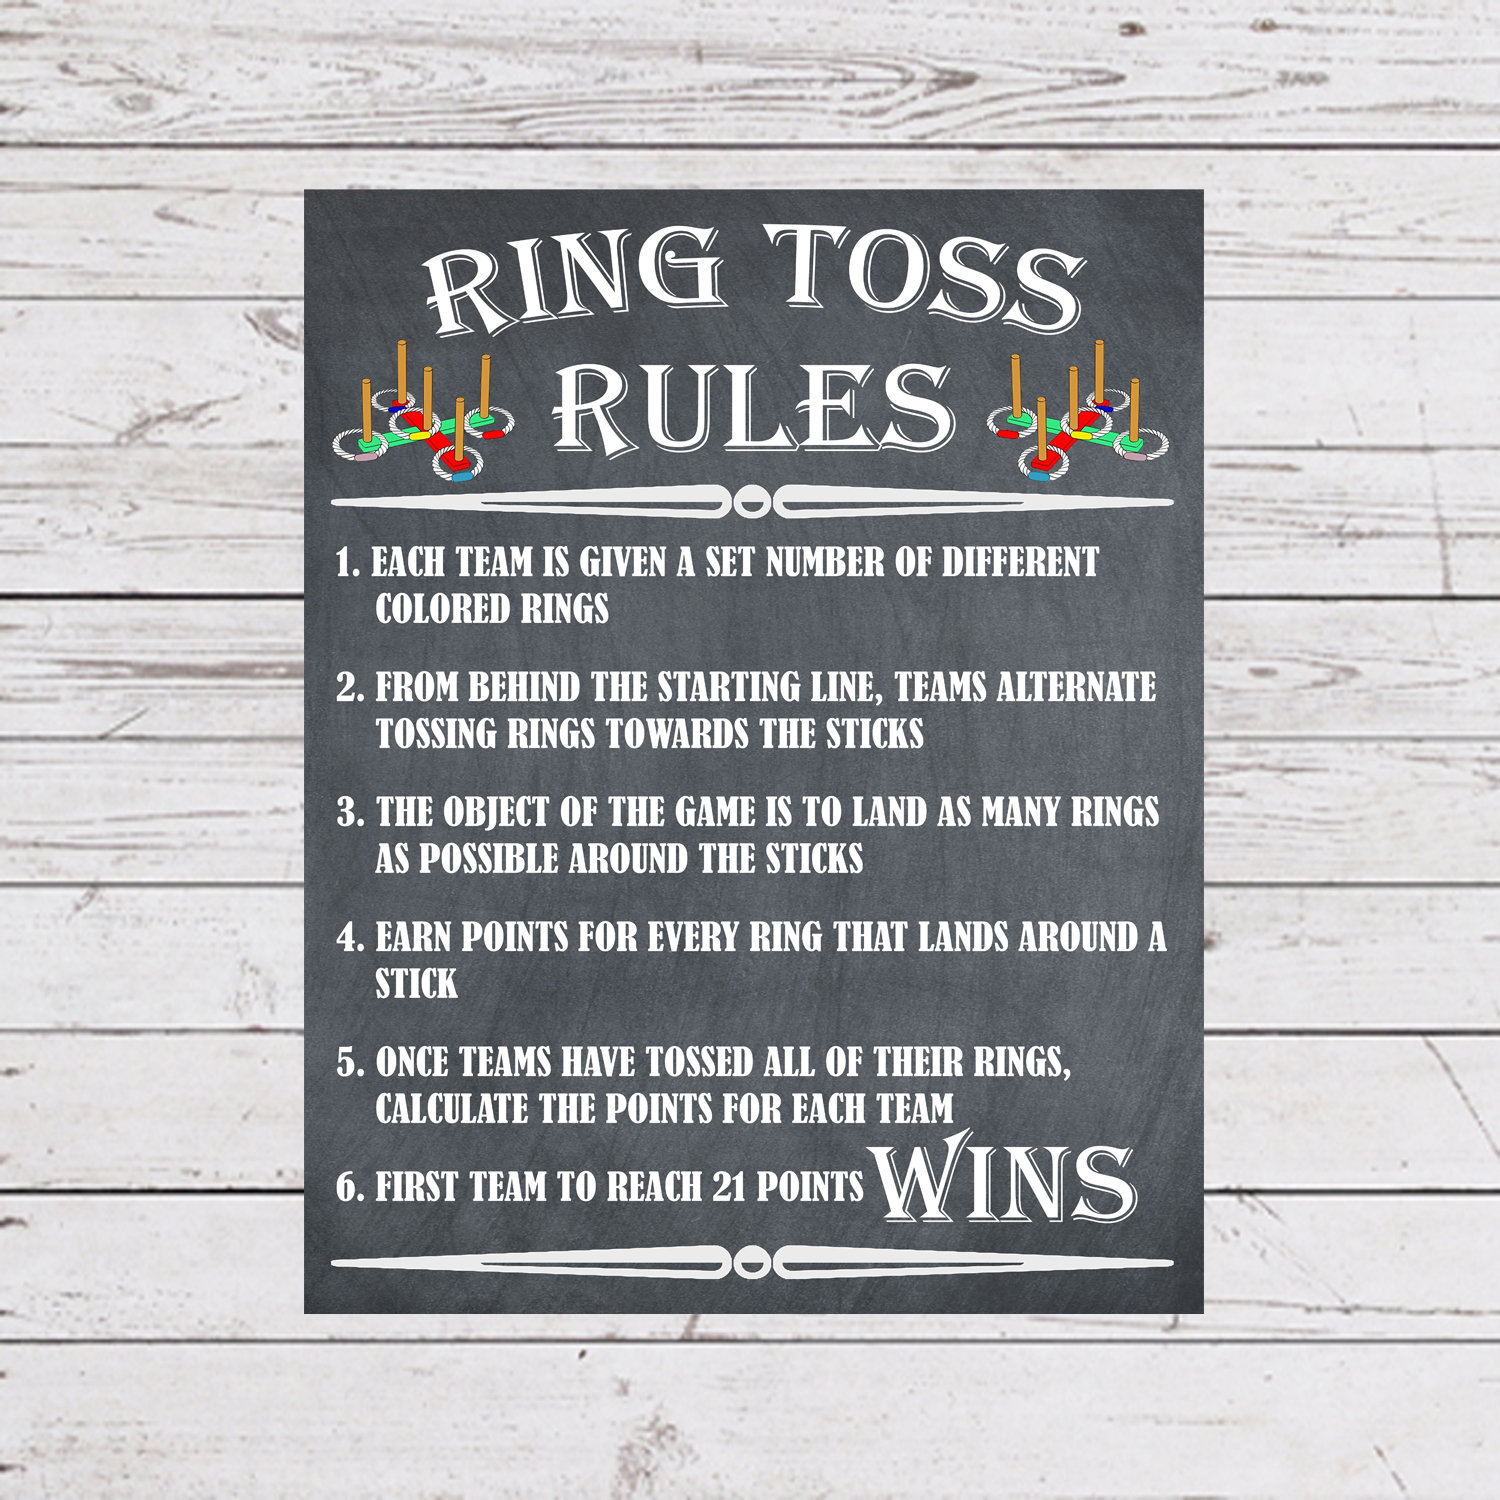 LAMINATED PERSONALIZED RING TOSS RULES SIGN POSTER FOR YOUR BACKYARD GAME |  eBay